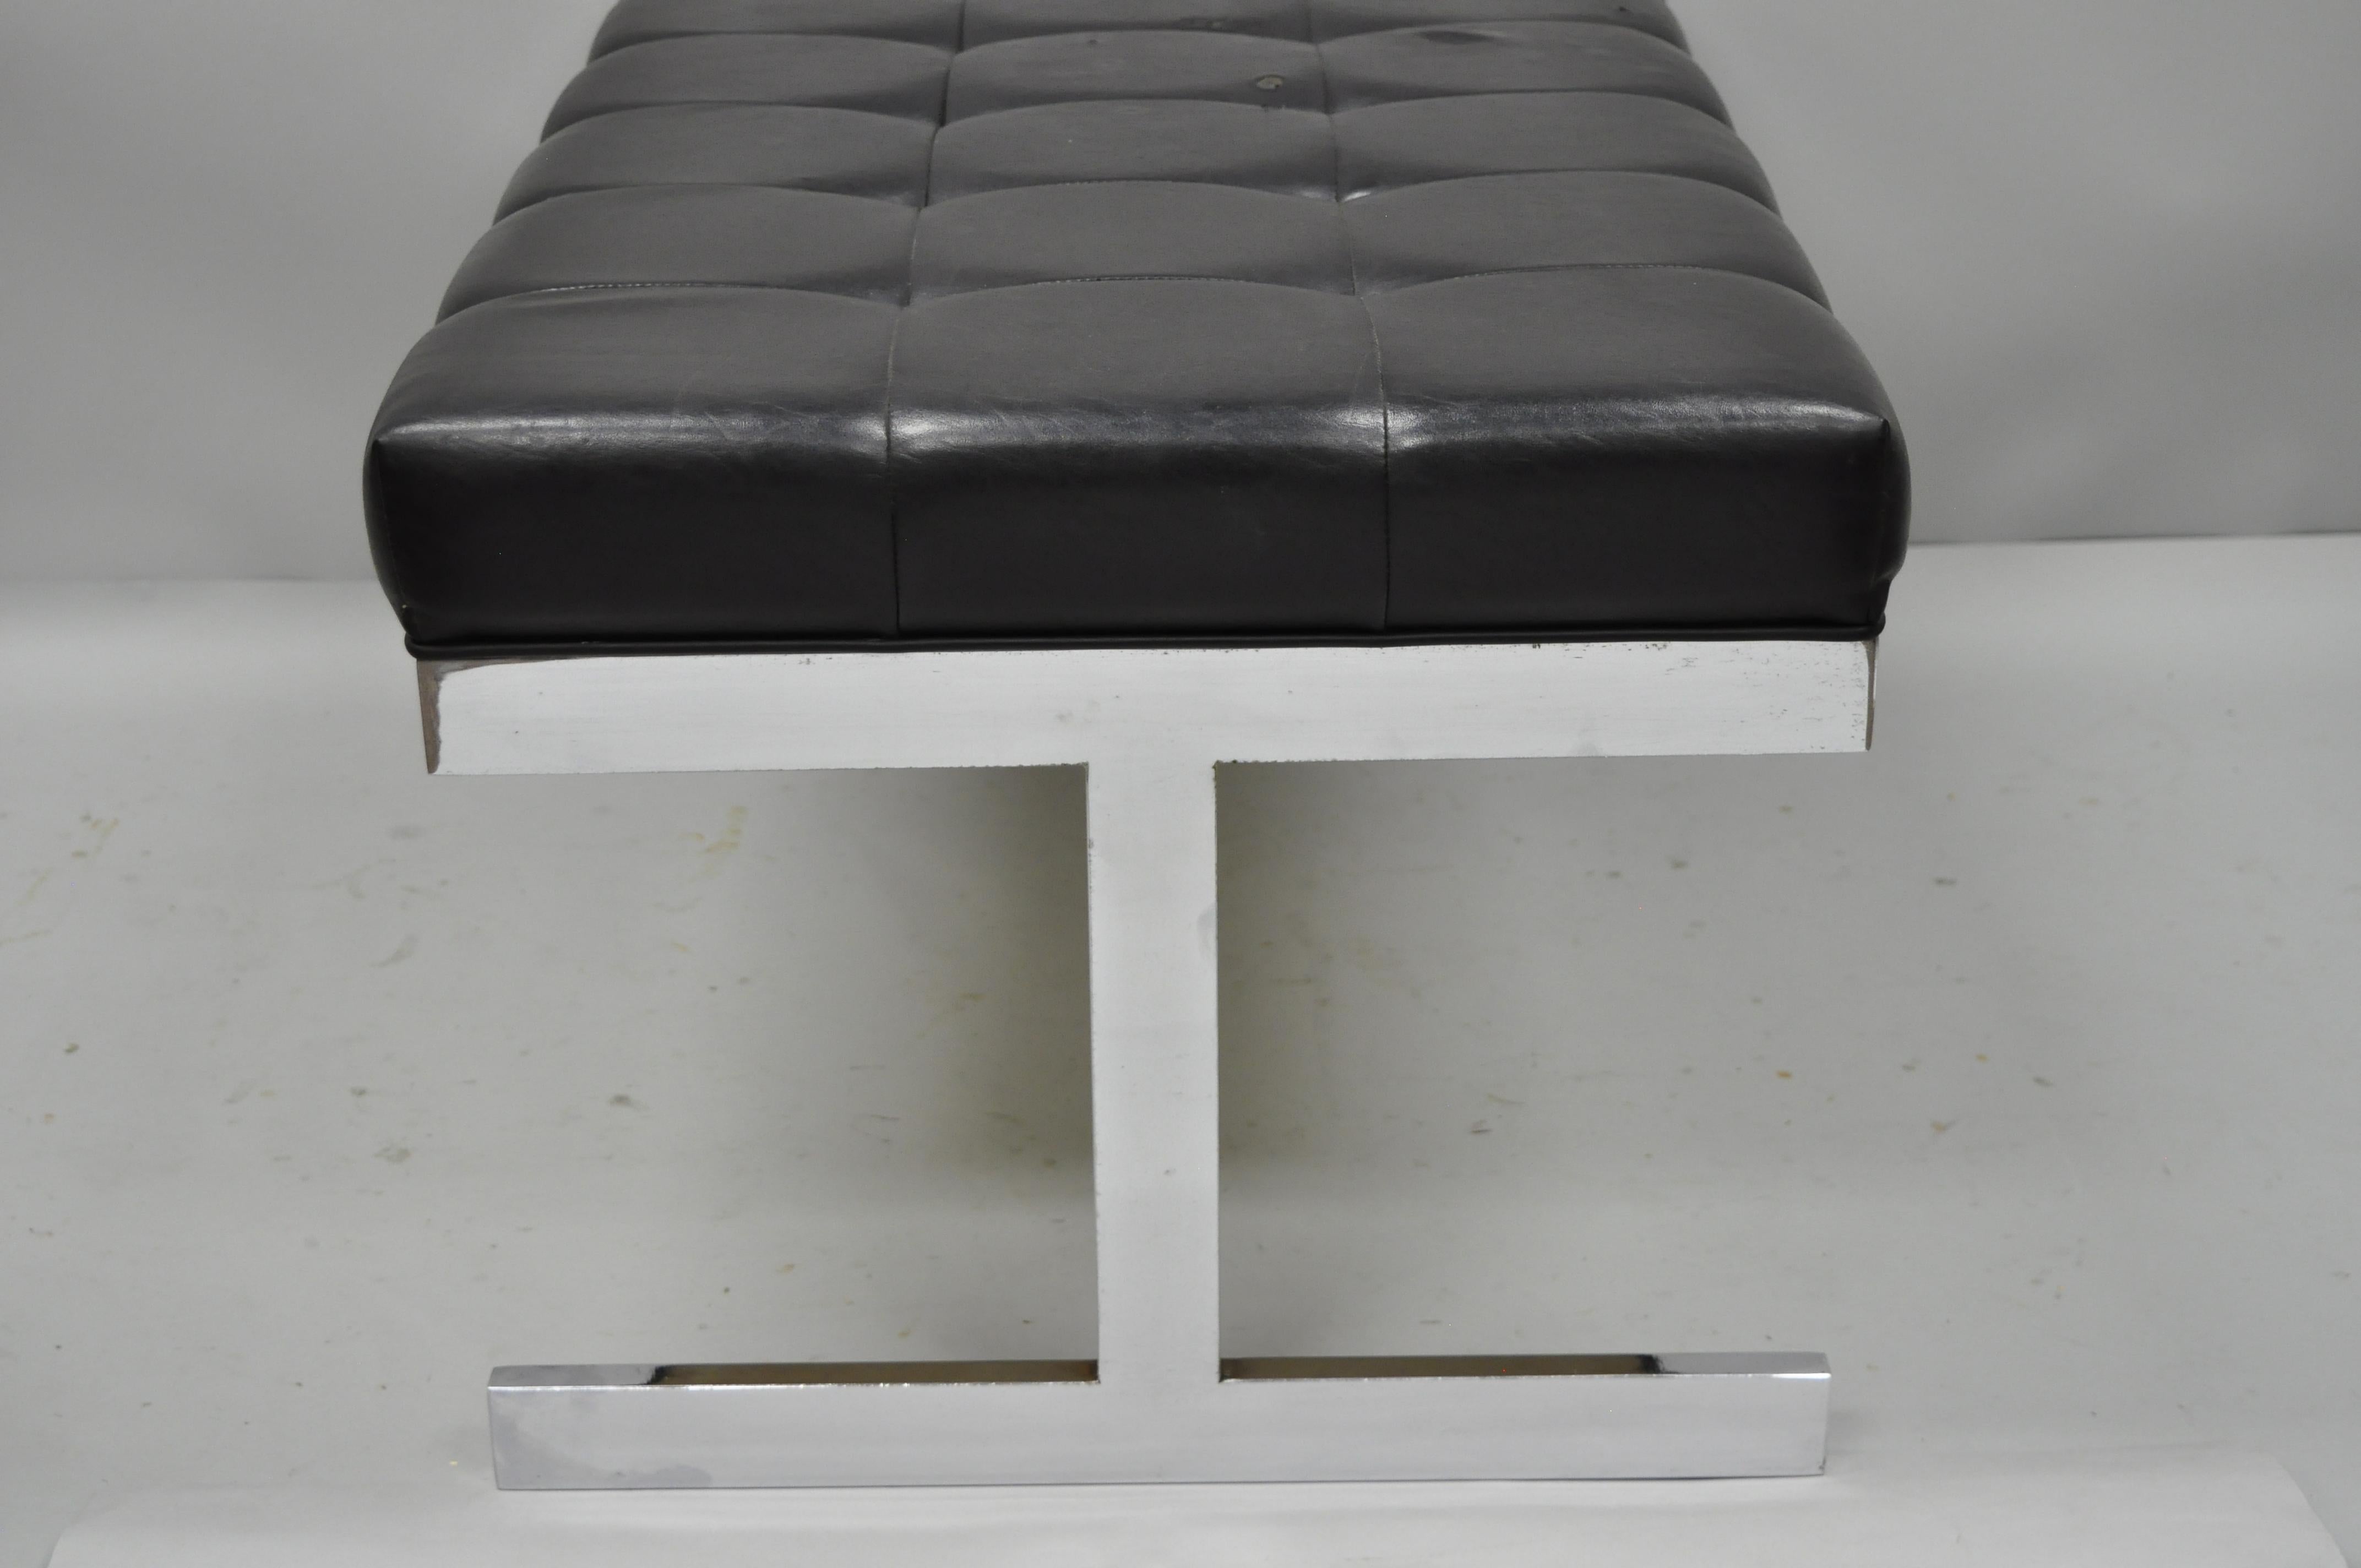 Tri-Mark design Milo Baughman style chrome and black vinyl tufted bench. Item features tufted black vinyl seat, chrome frame base, seamless joints, original label, clean Modernist lines, and great style and form, circa 1960. Measurements: 19